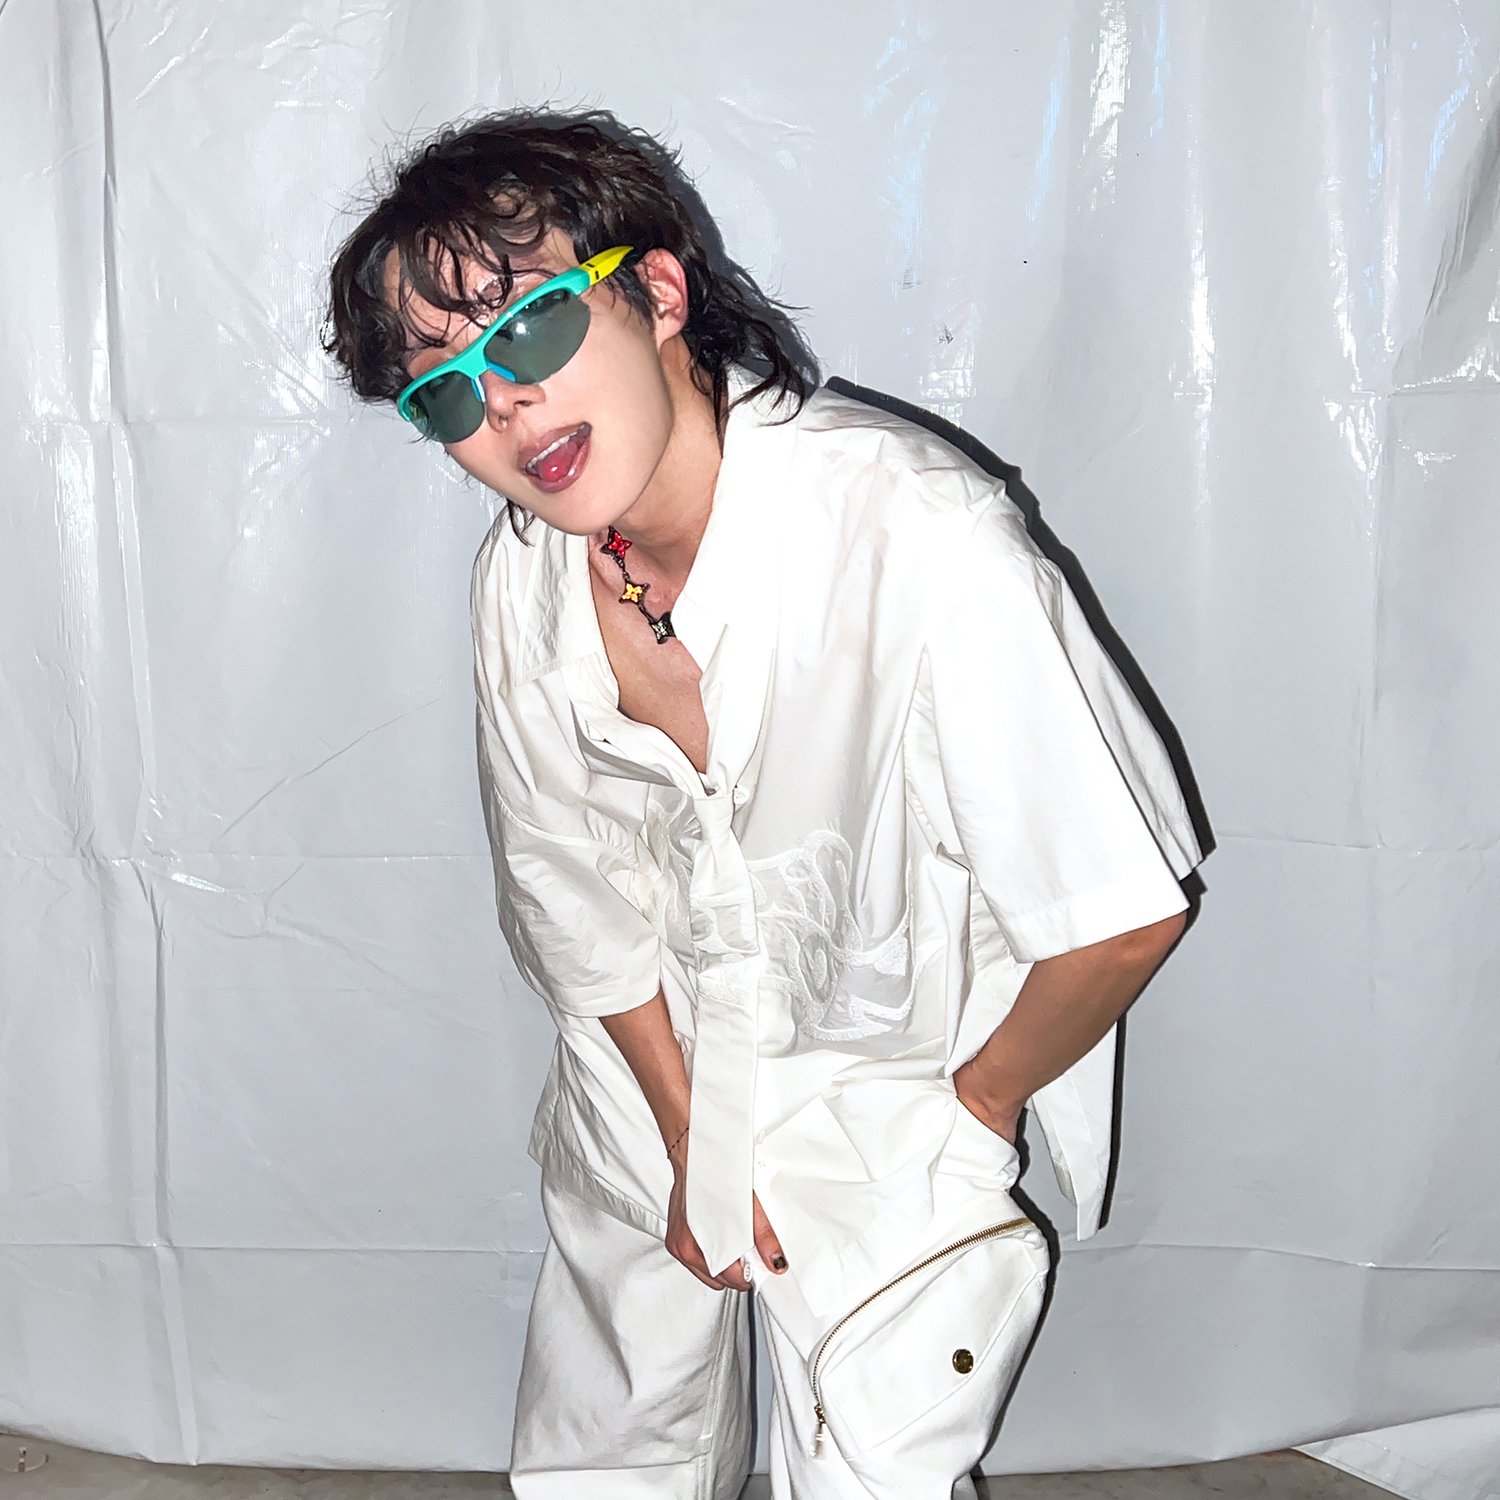 j-hope Makes History As The First South Korean Artist To Headline  Lollapalooza — US BTS ARMY